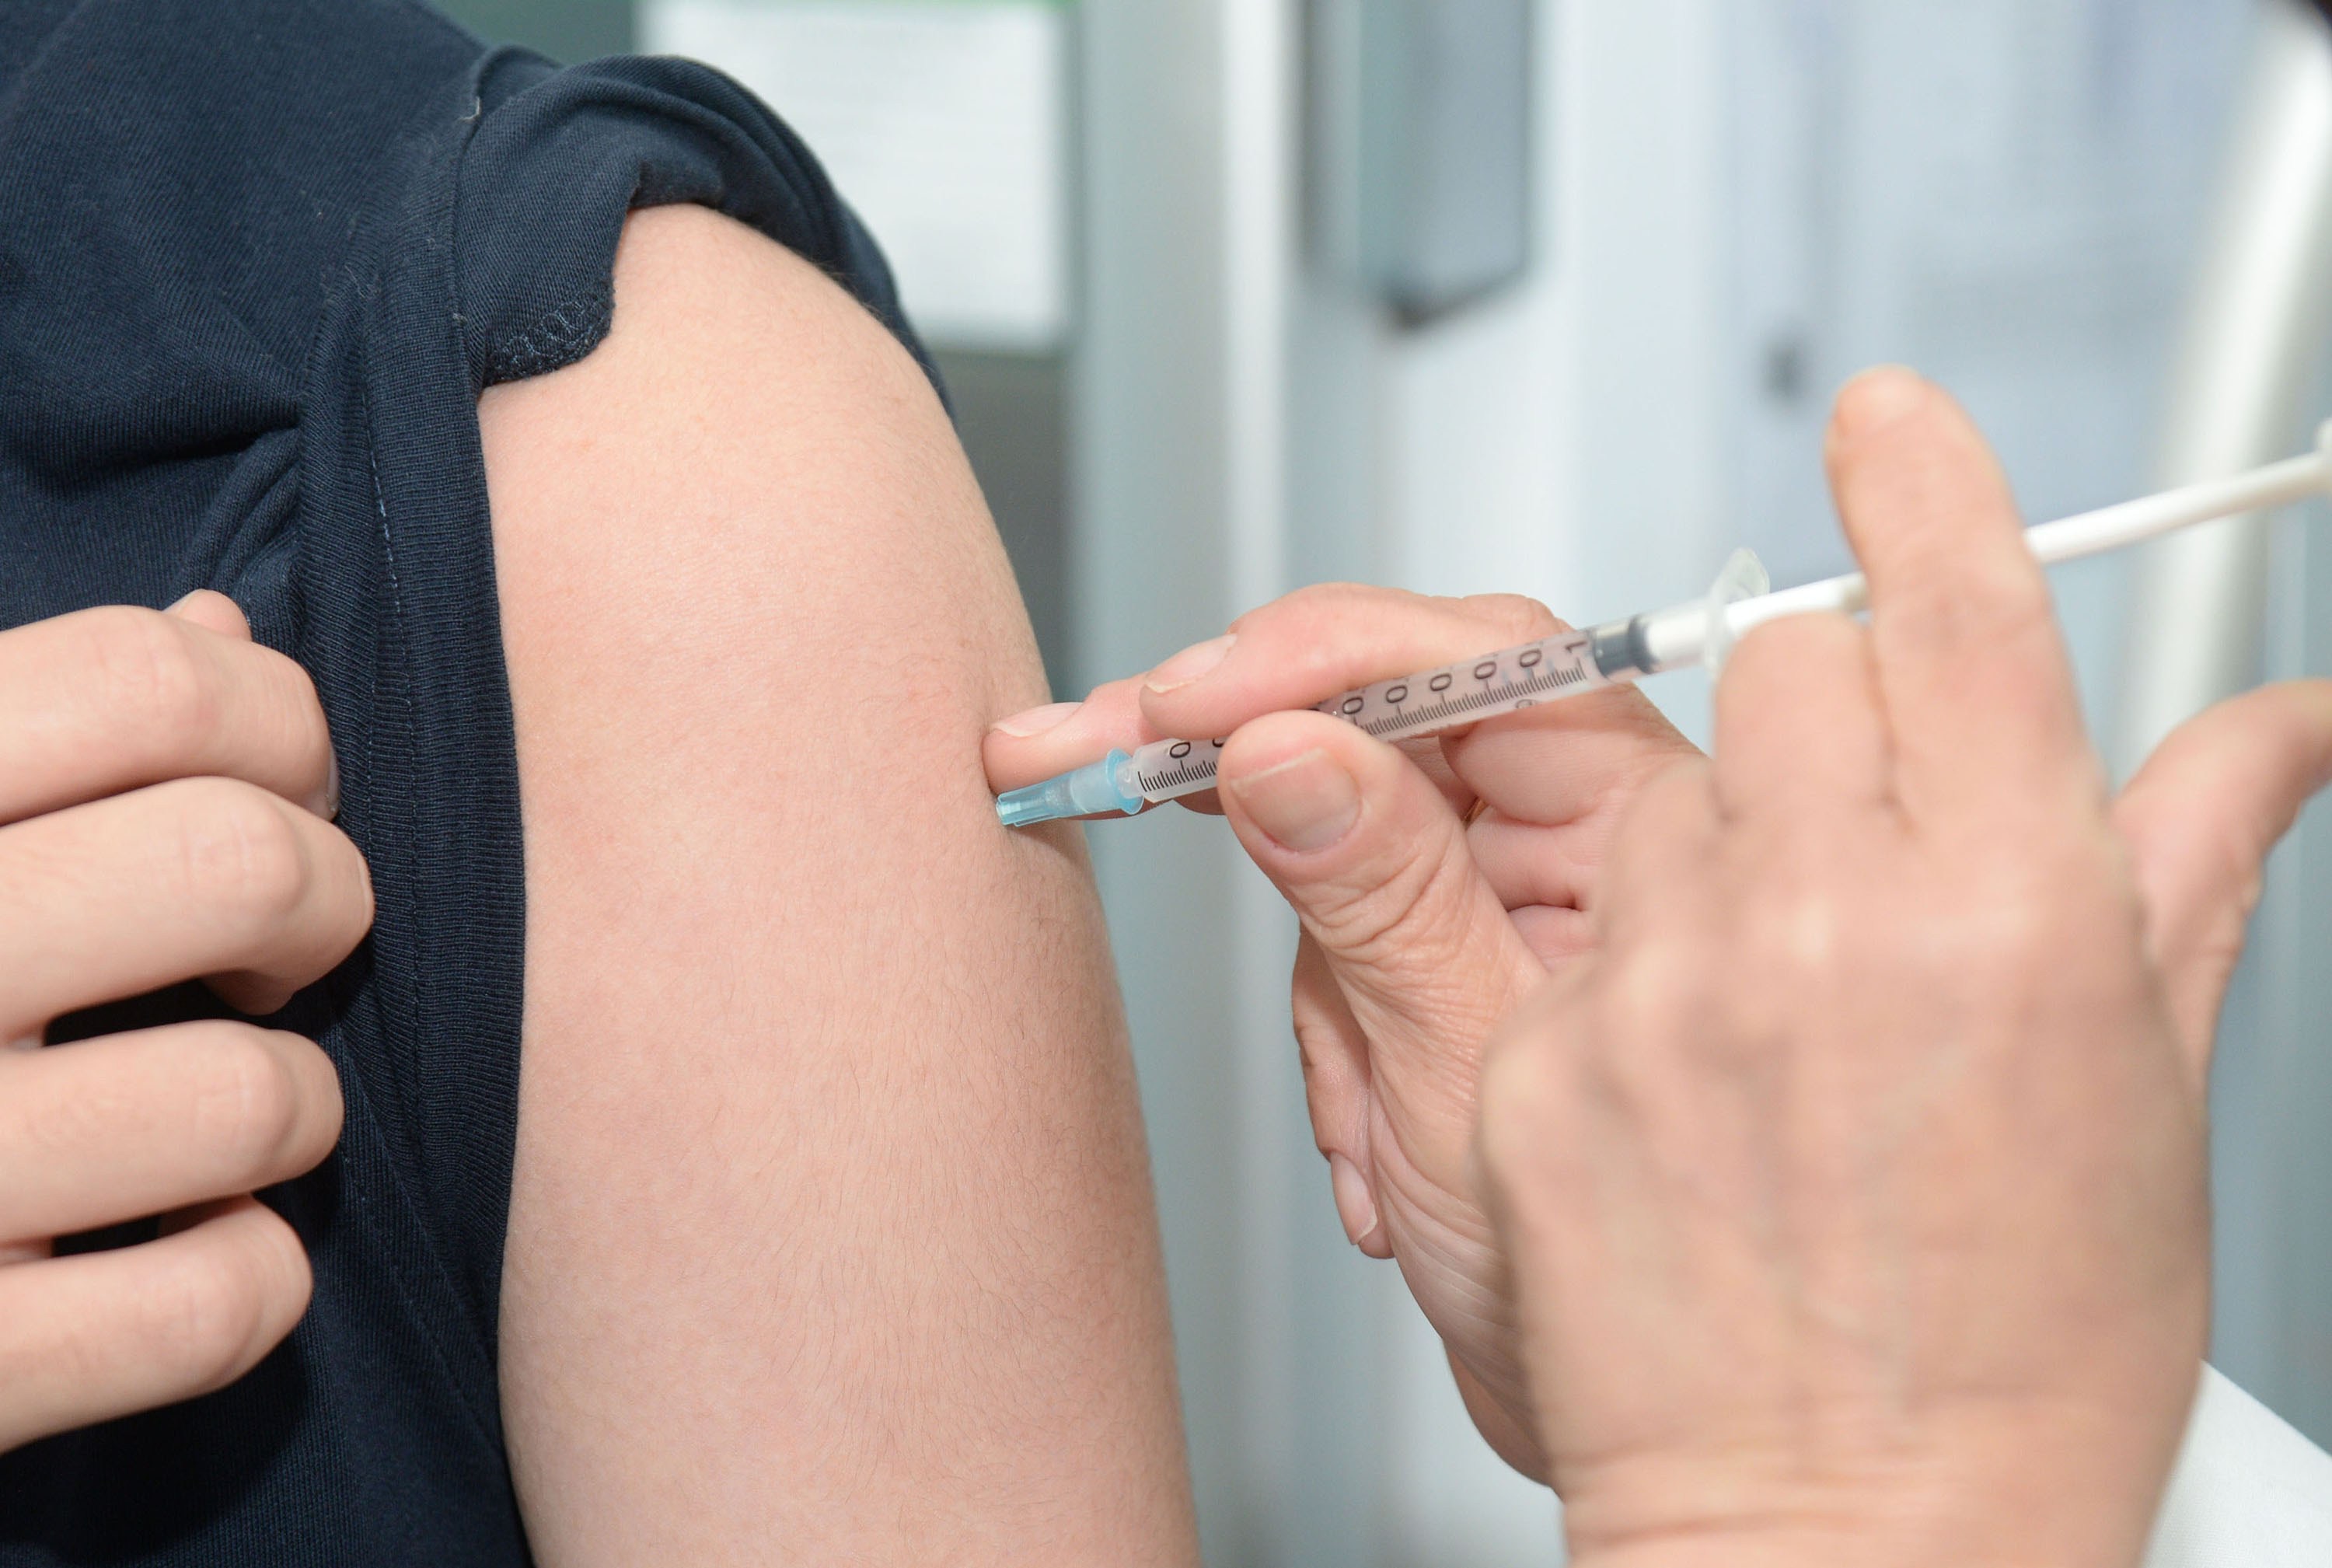 The Debate About the Flu Shot